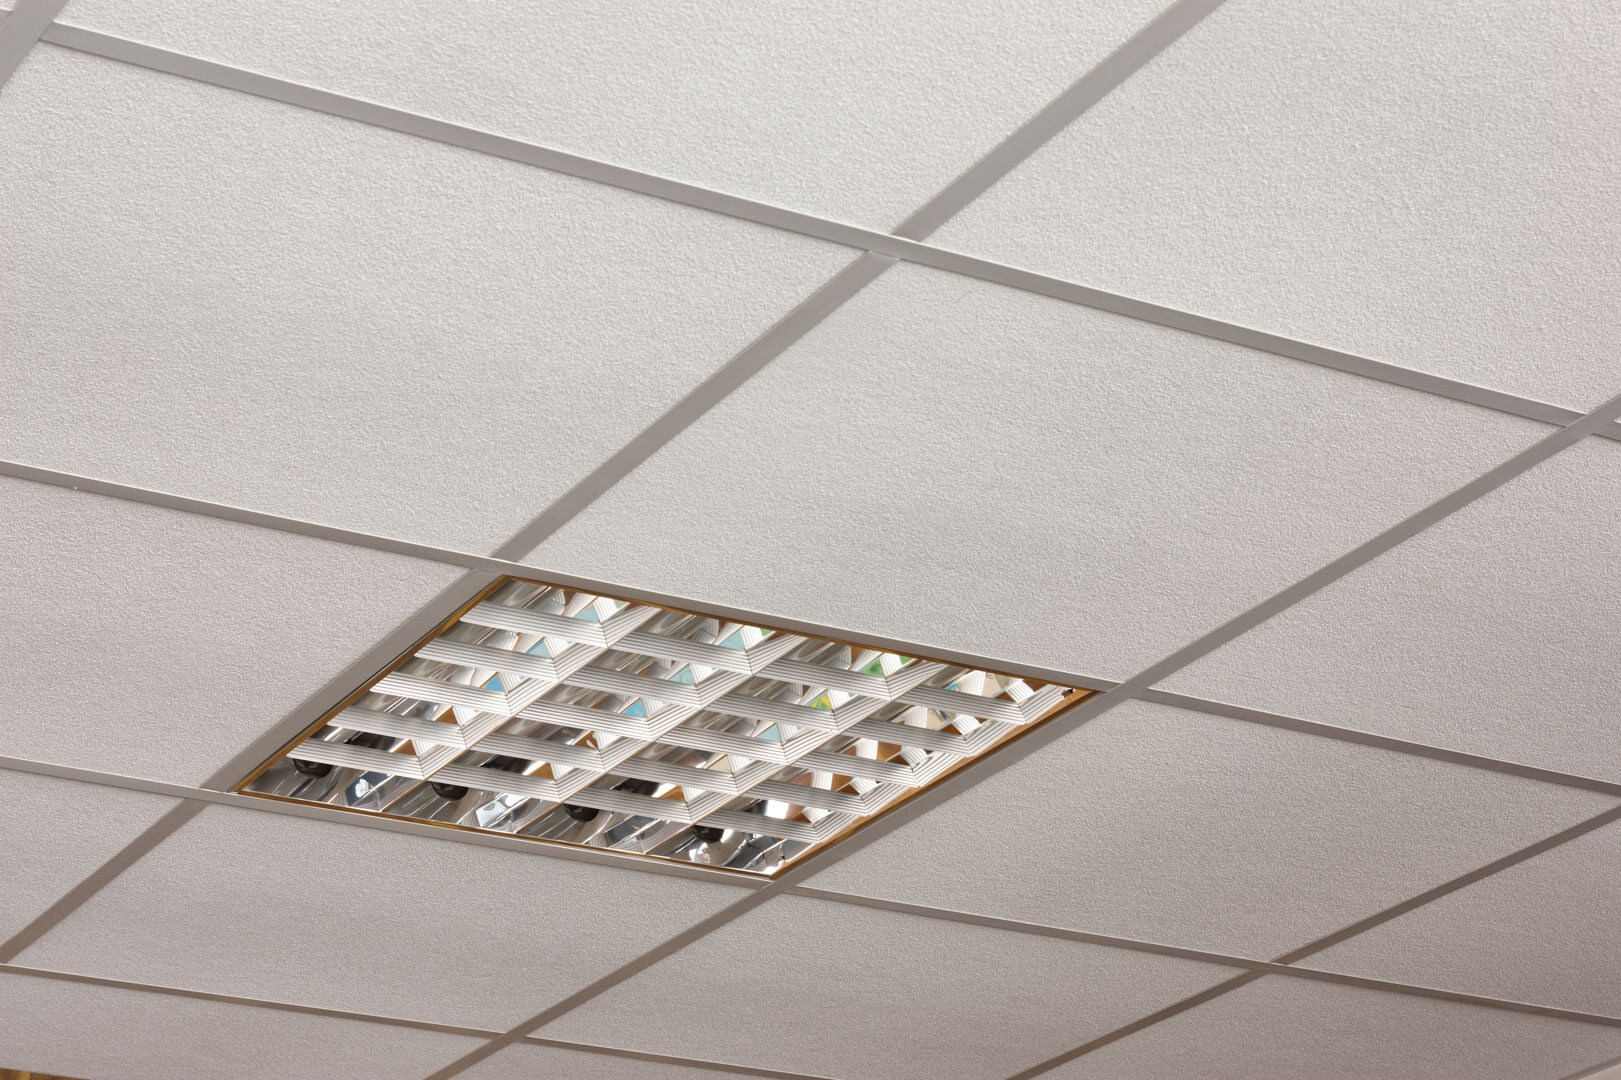 Permalink to False Ceiling Tiles Images